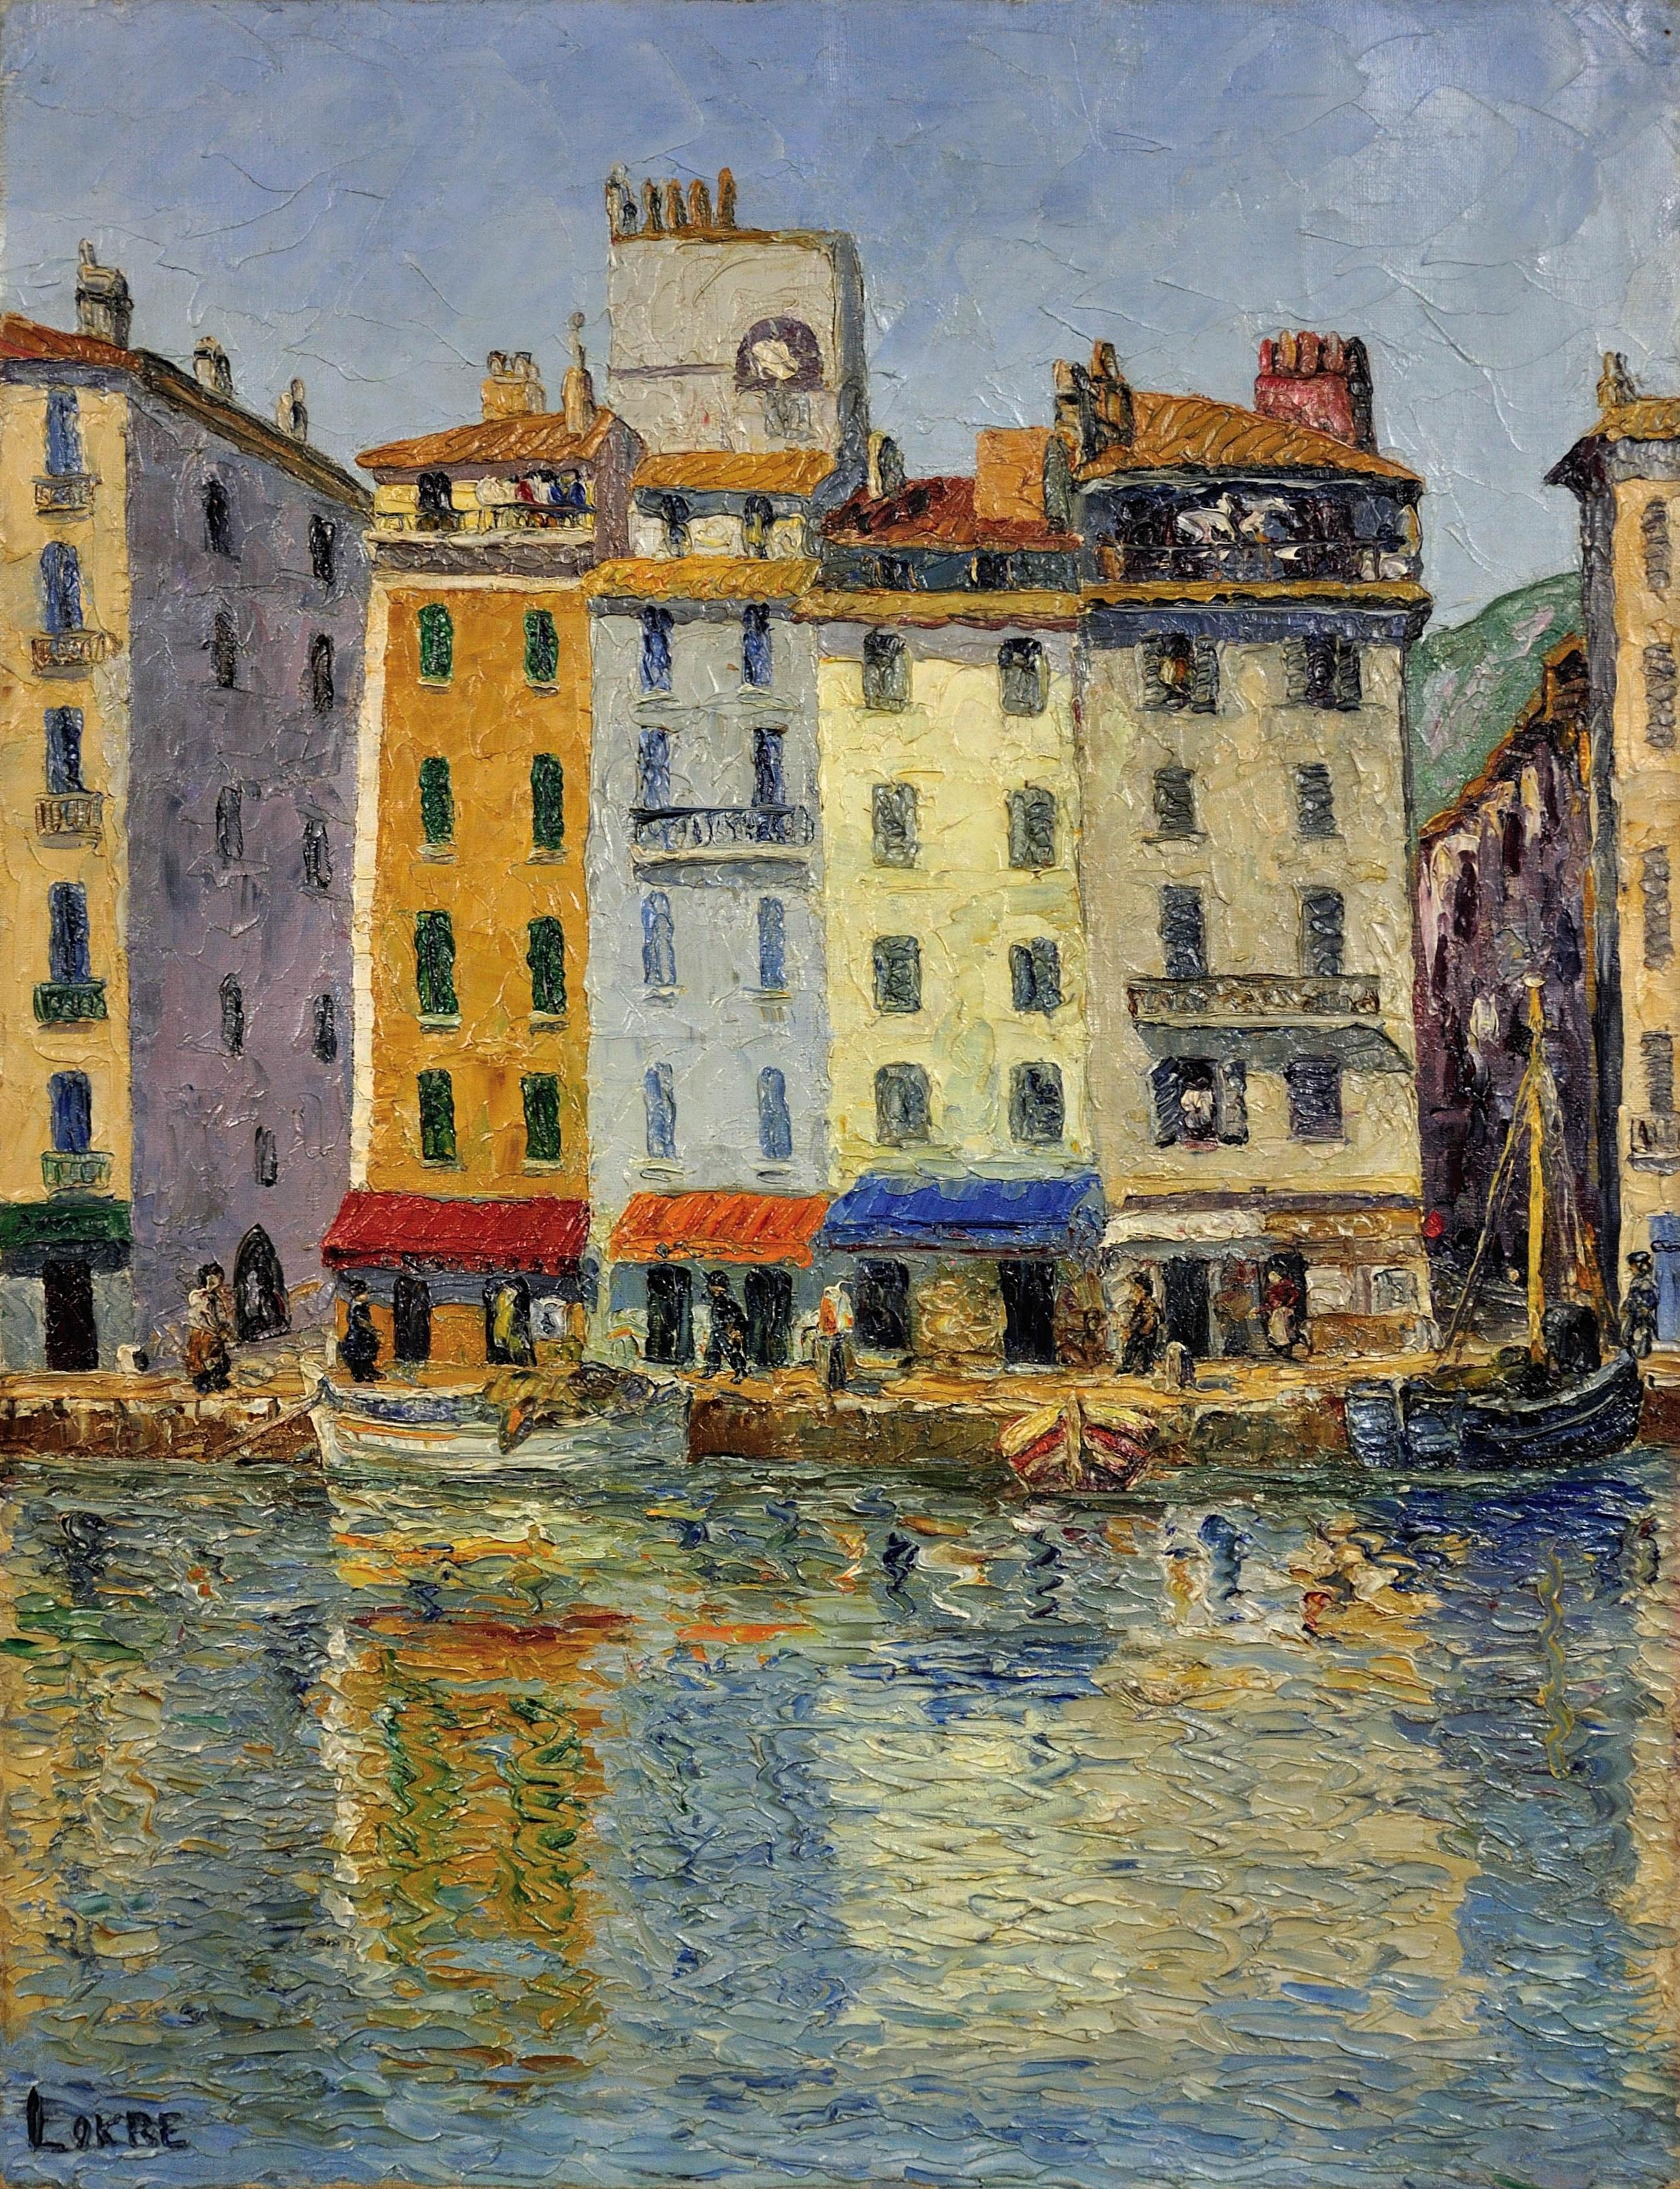 Toulon, Le Port, La Vieille Darse, Mai 1939. France. 4 Months Before WWII. Lokre - Painting by Unknown